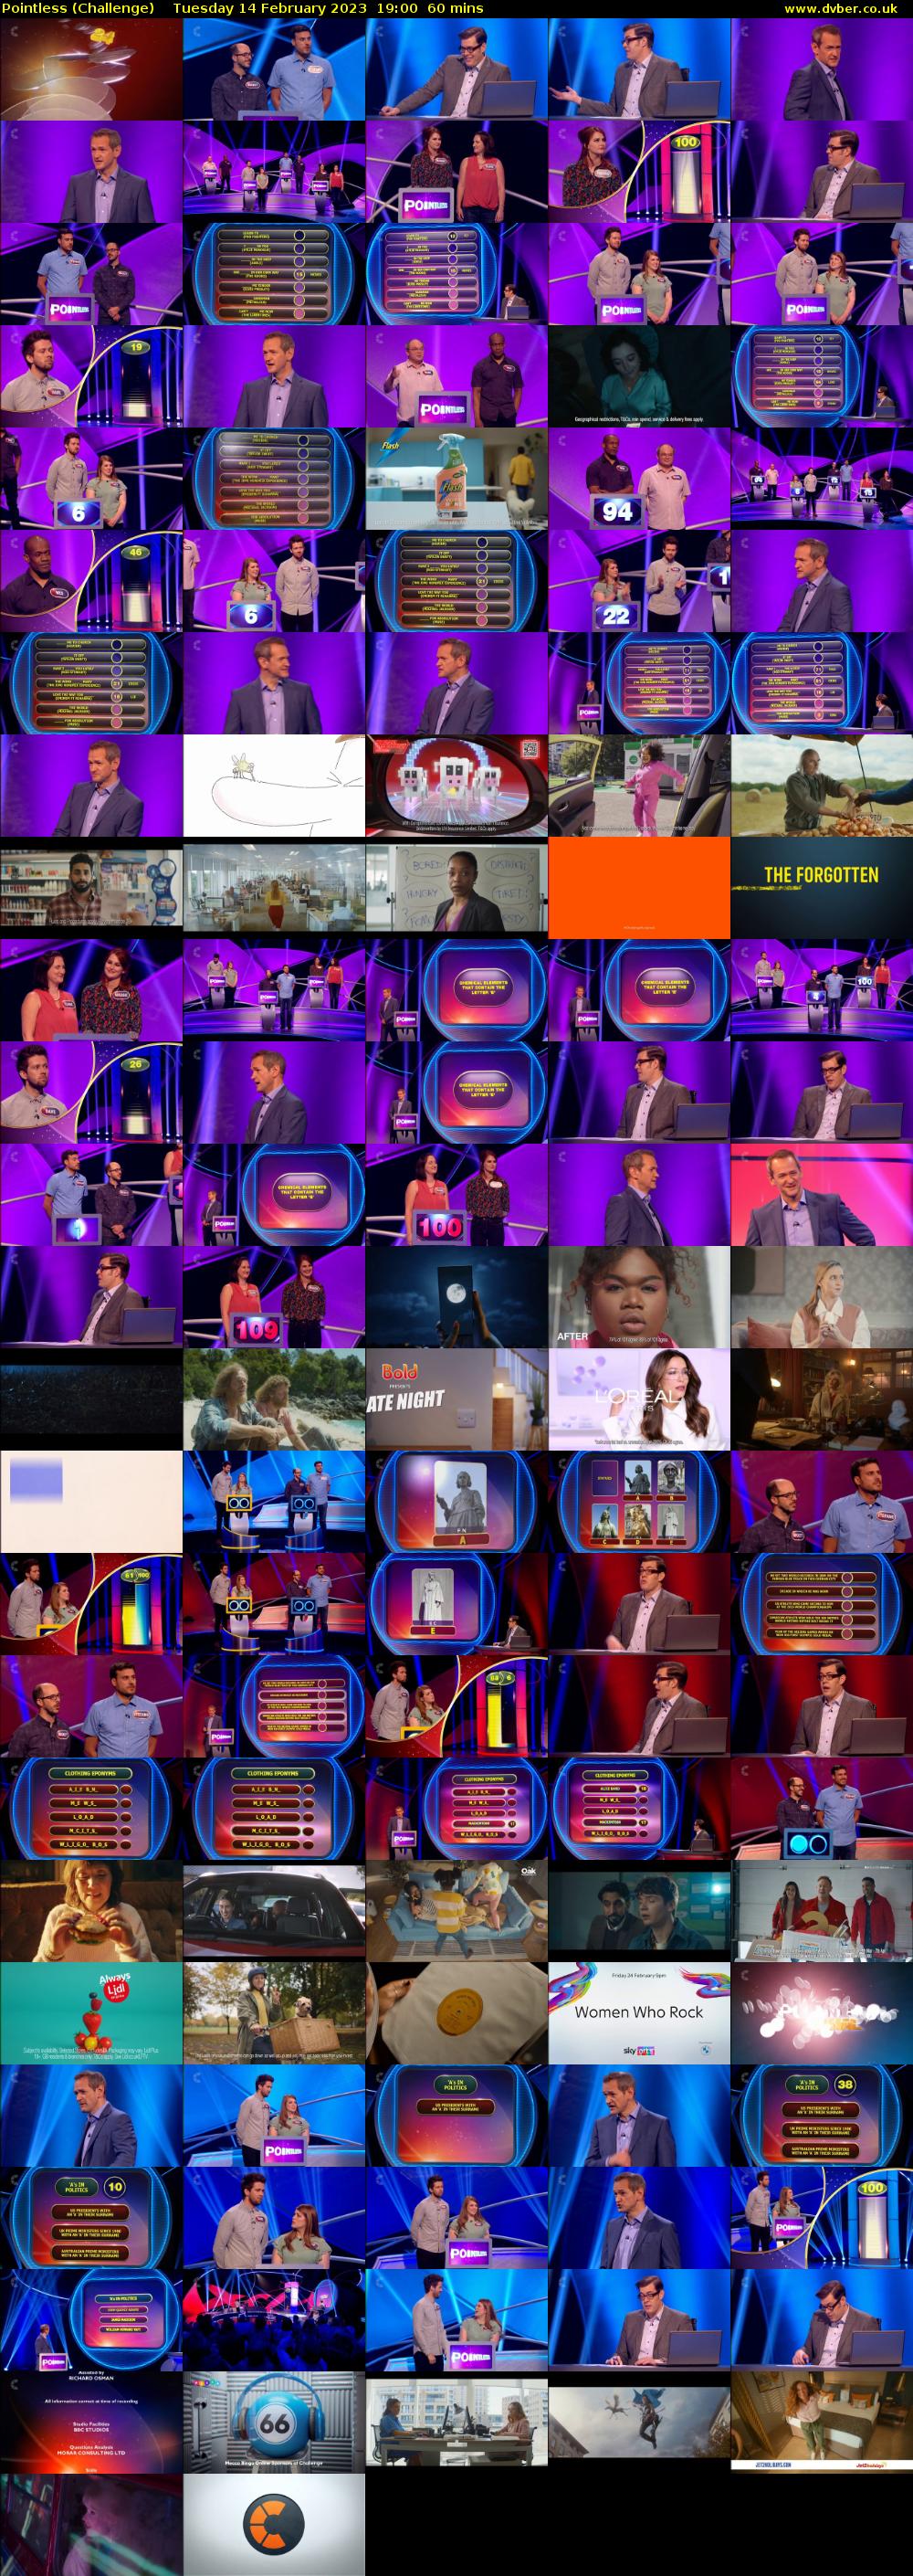 Pointless (Challenge) Tuesday 14 February 2023 19:00 - 20:00